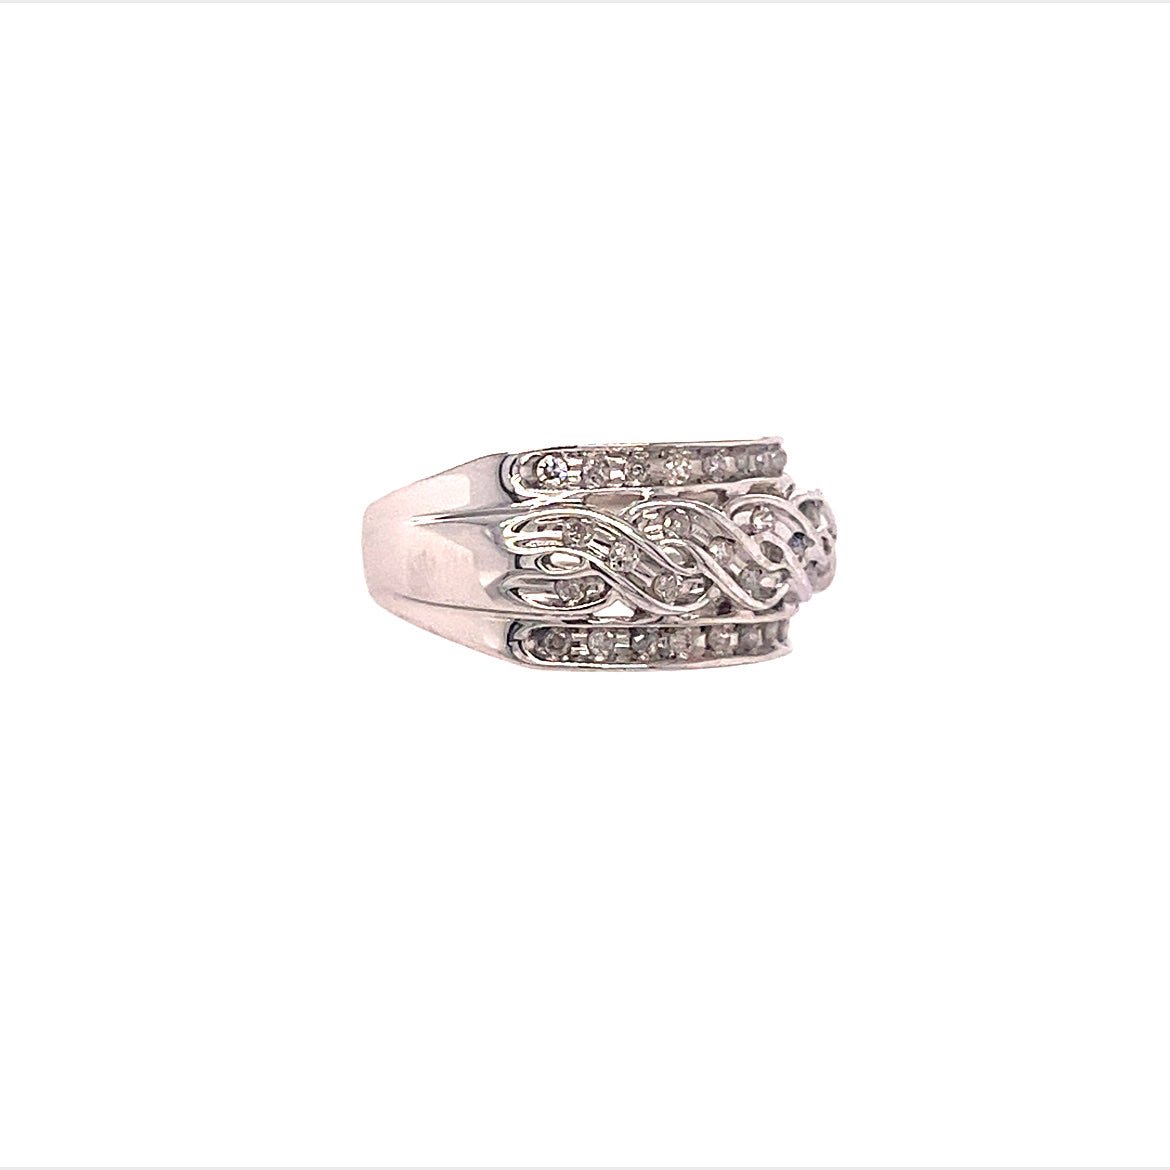 14KT WHITE GOLD BRAIDED STYLE WITH DIAMOND LADIES RING